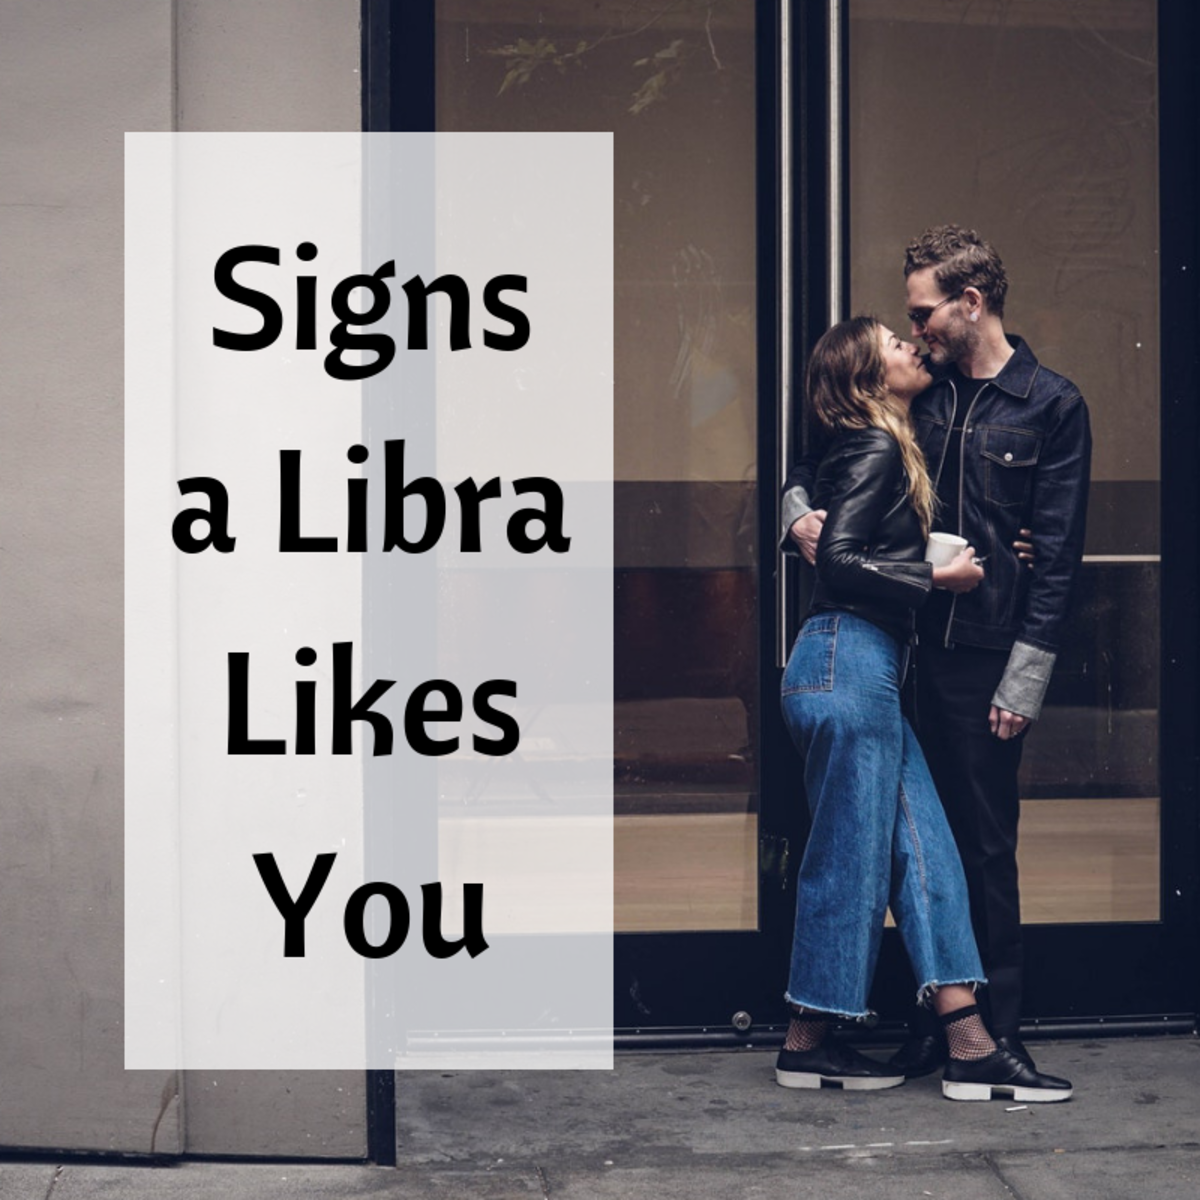 Libras can be tricky to decipher, but there are some obvious signs if they like you.